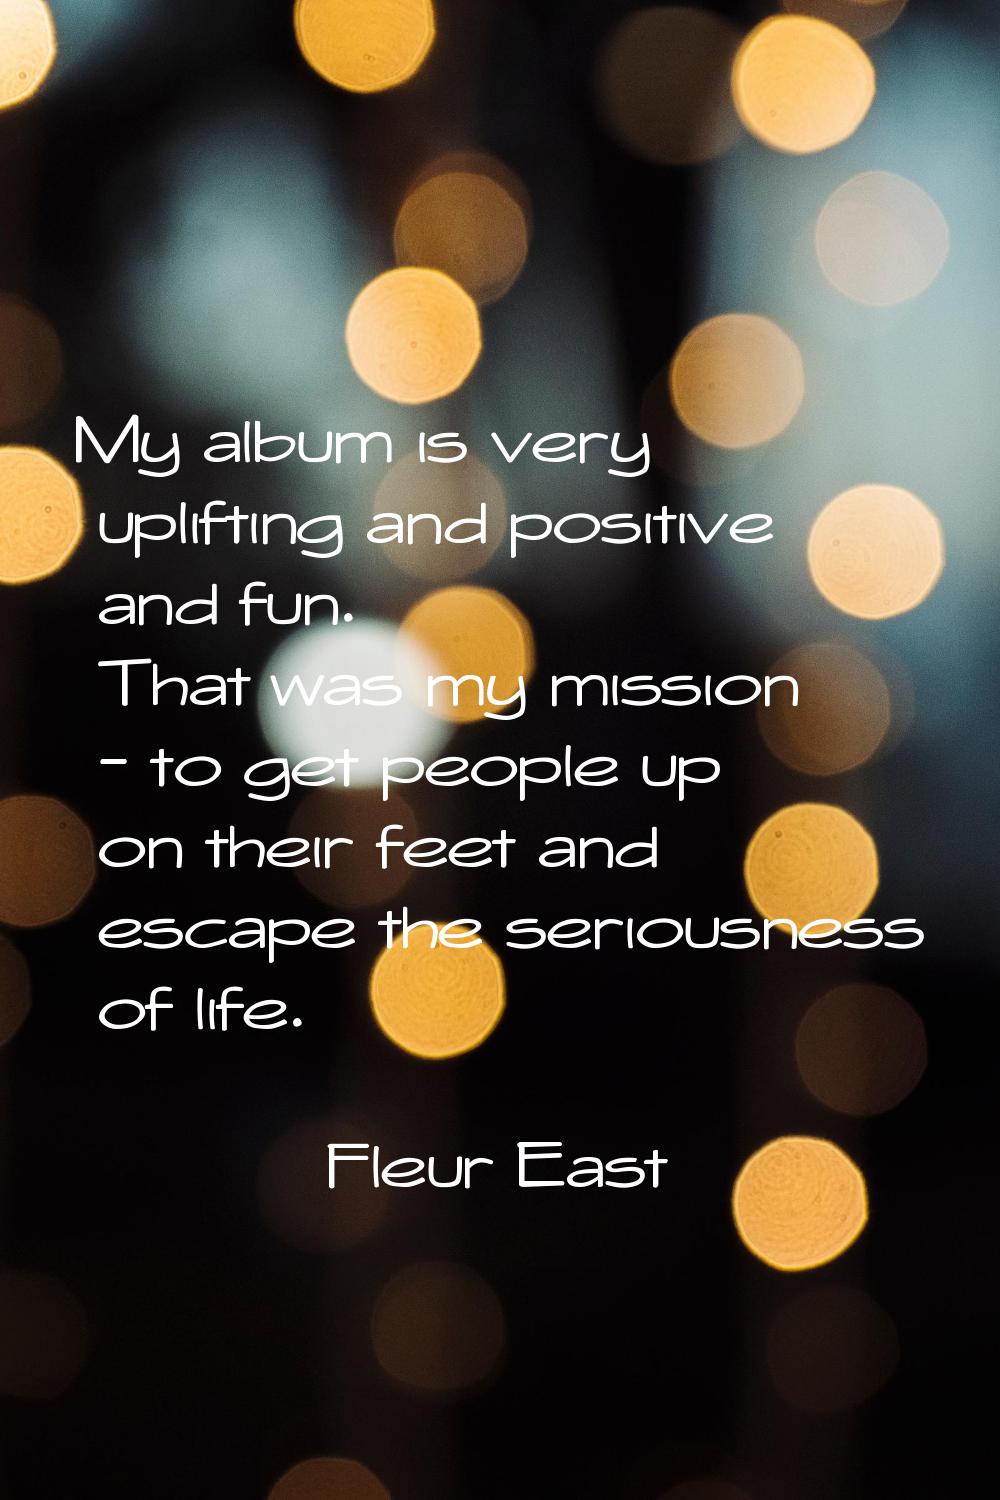 My album is very uplifting and positive and fun. That was my mission - to get people up on their fe